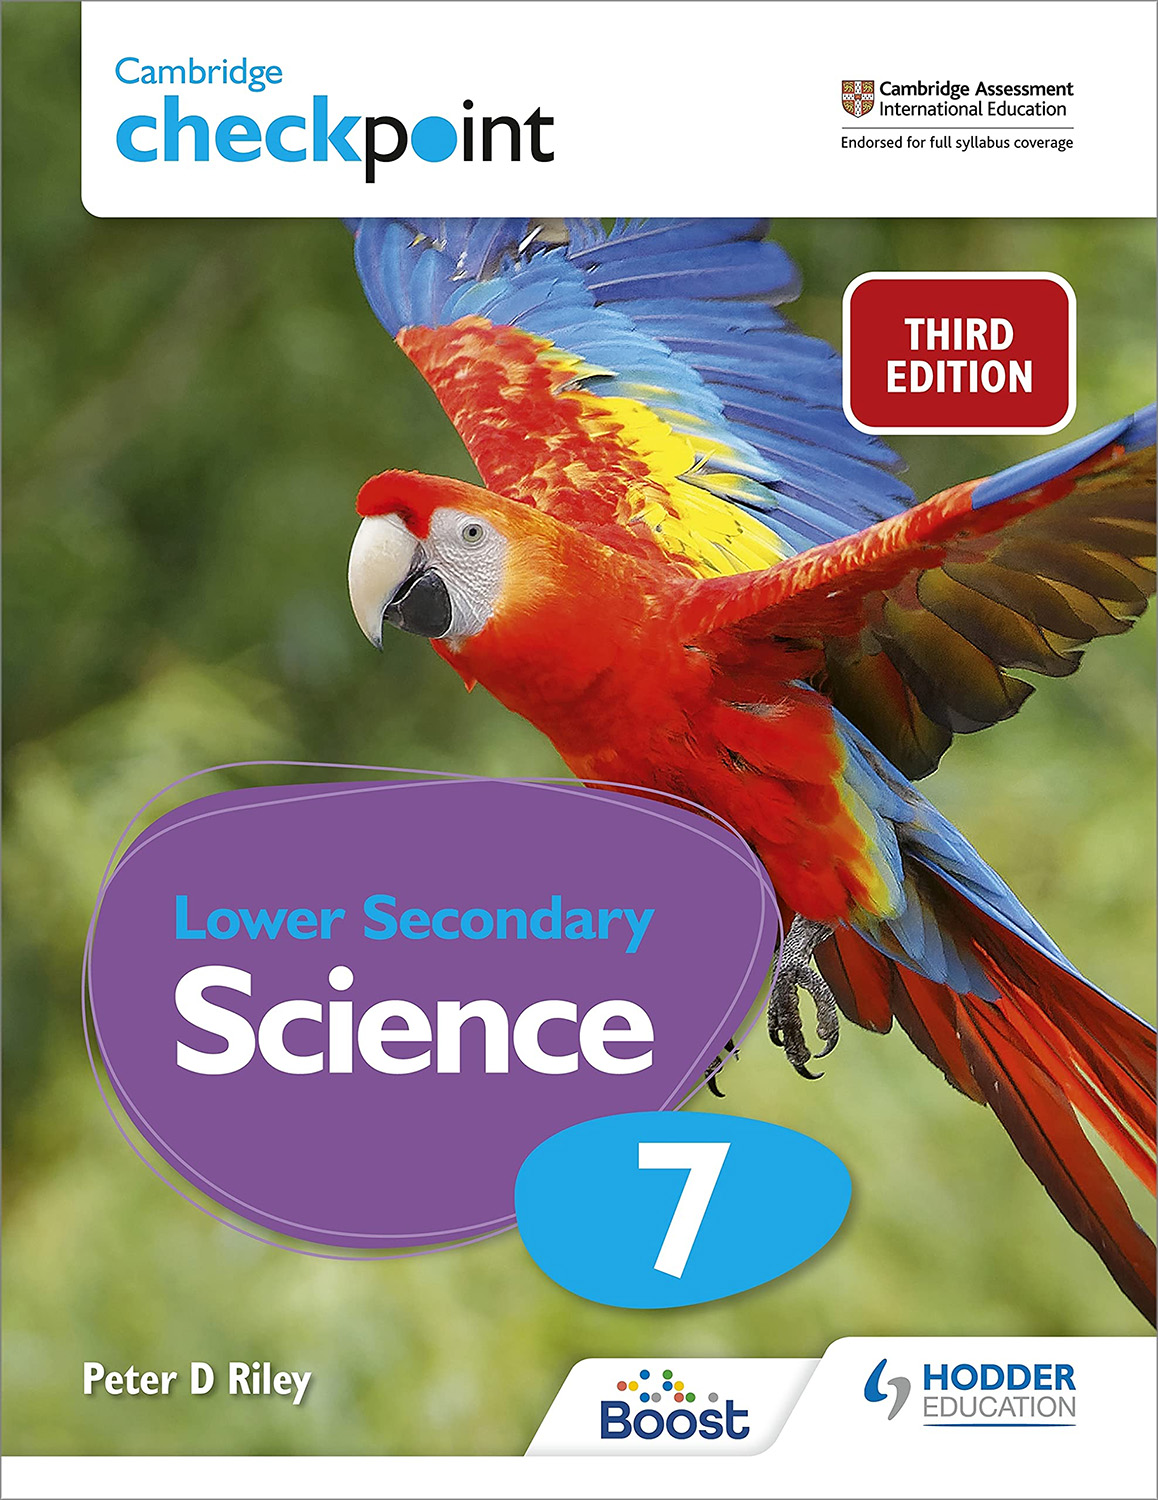 Cambridge Checkpoint: Lower Secondary Science 7 - Student’s Book | Peter Riley